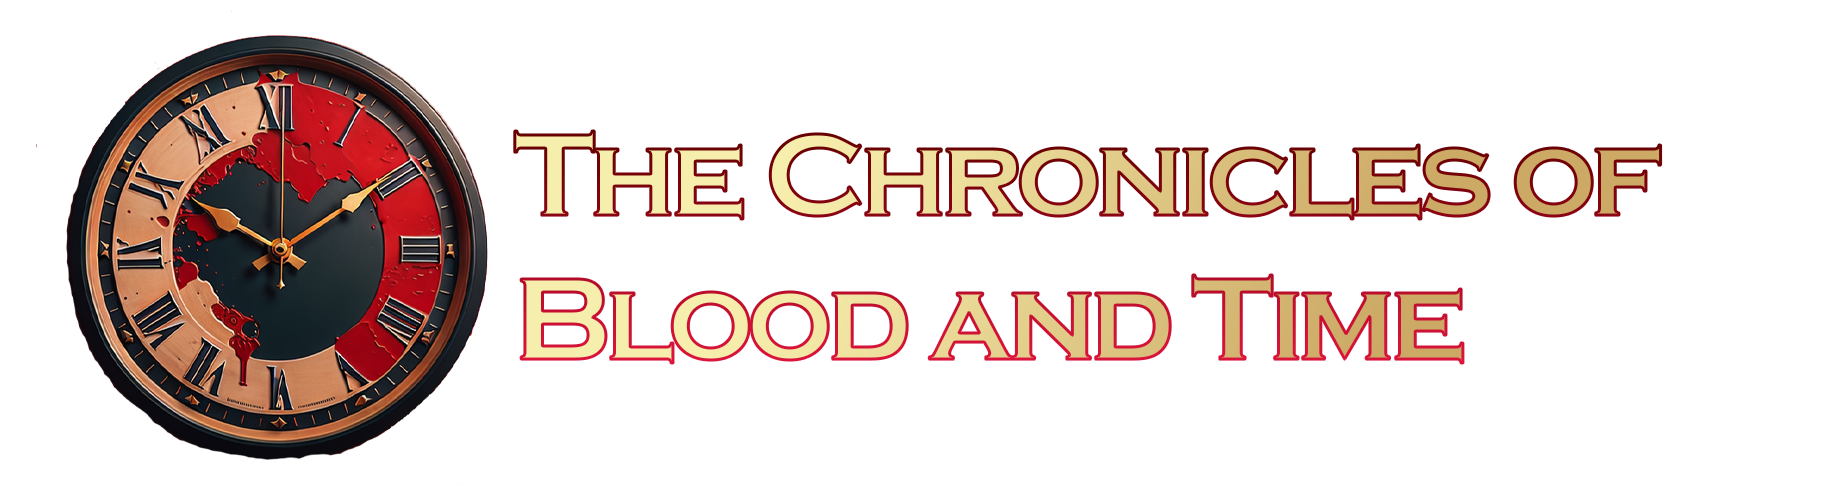 Chronicles of Blood and Time - Chronoverses